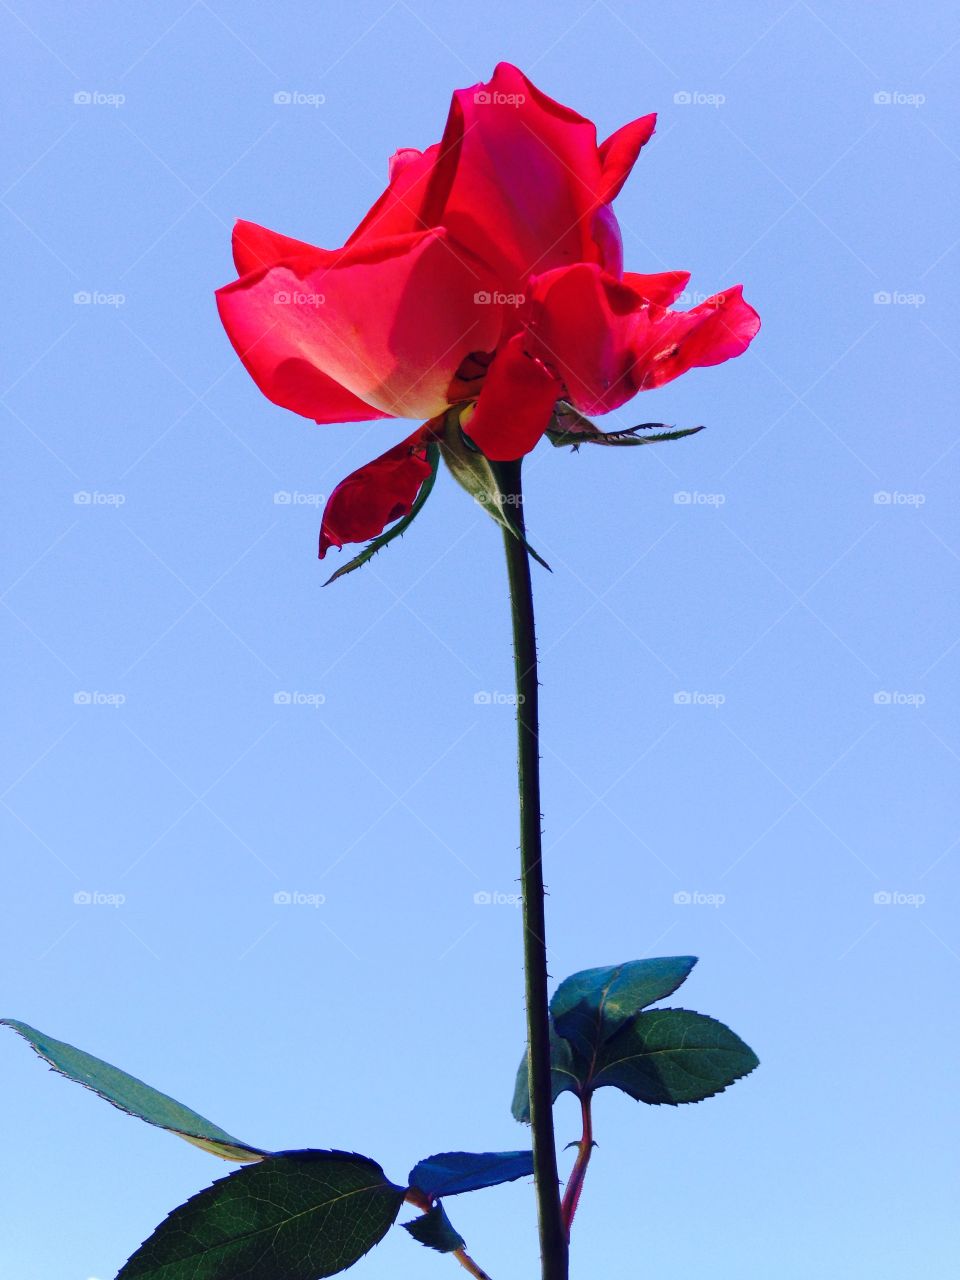 Long Stem Red Rose w Leaves. I think prettiest pic of my garden's red long stemmed rose with its leaves at the bottom. Pic taken against blue sky!